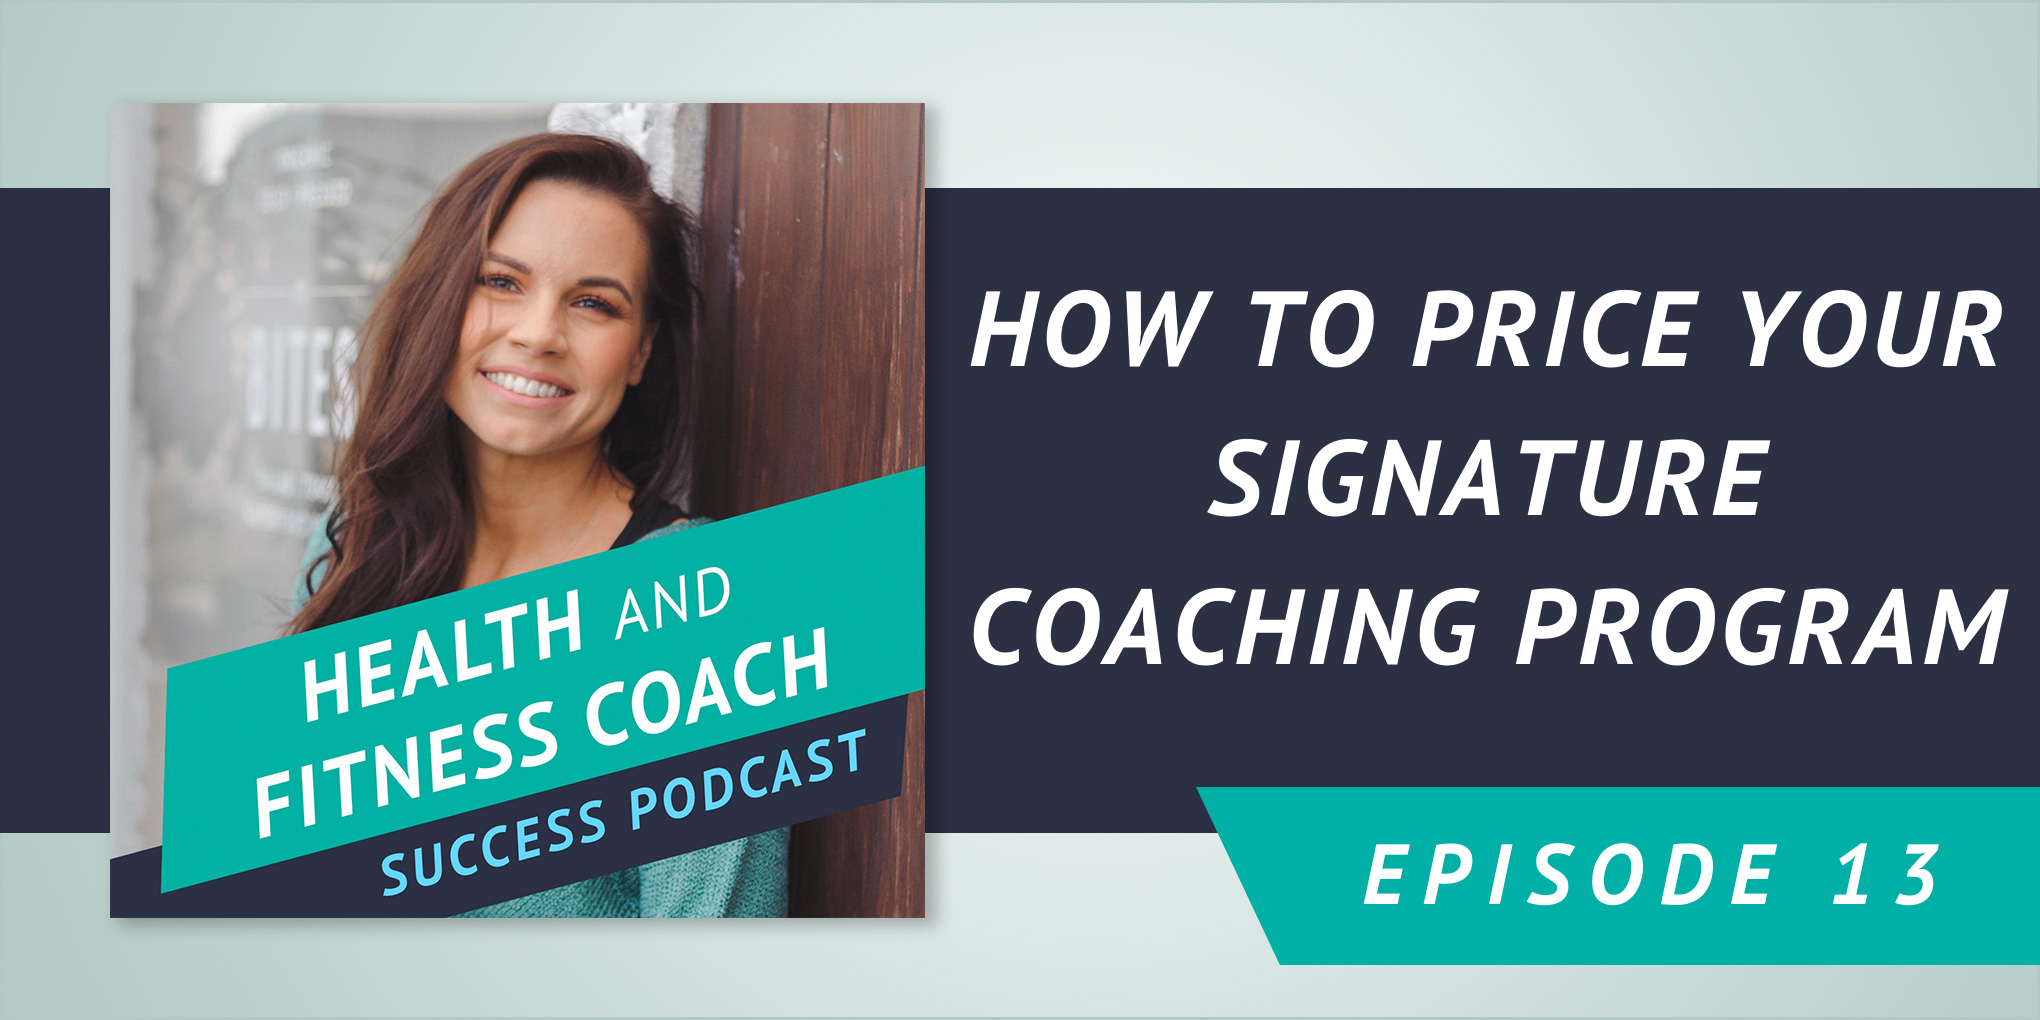 How To Price Your Signature Coaching Program